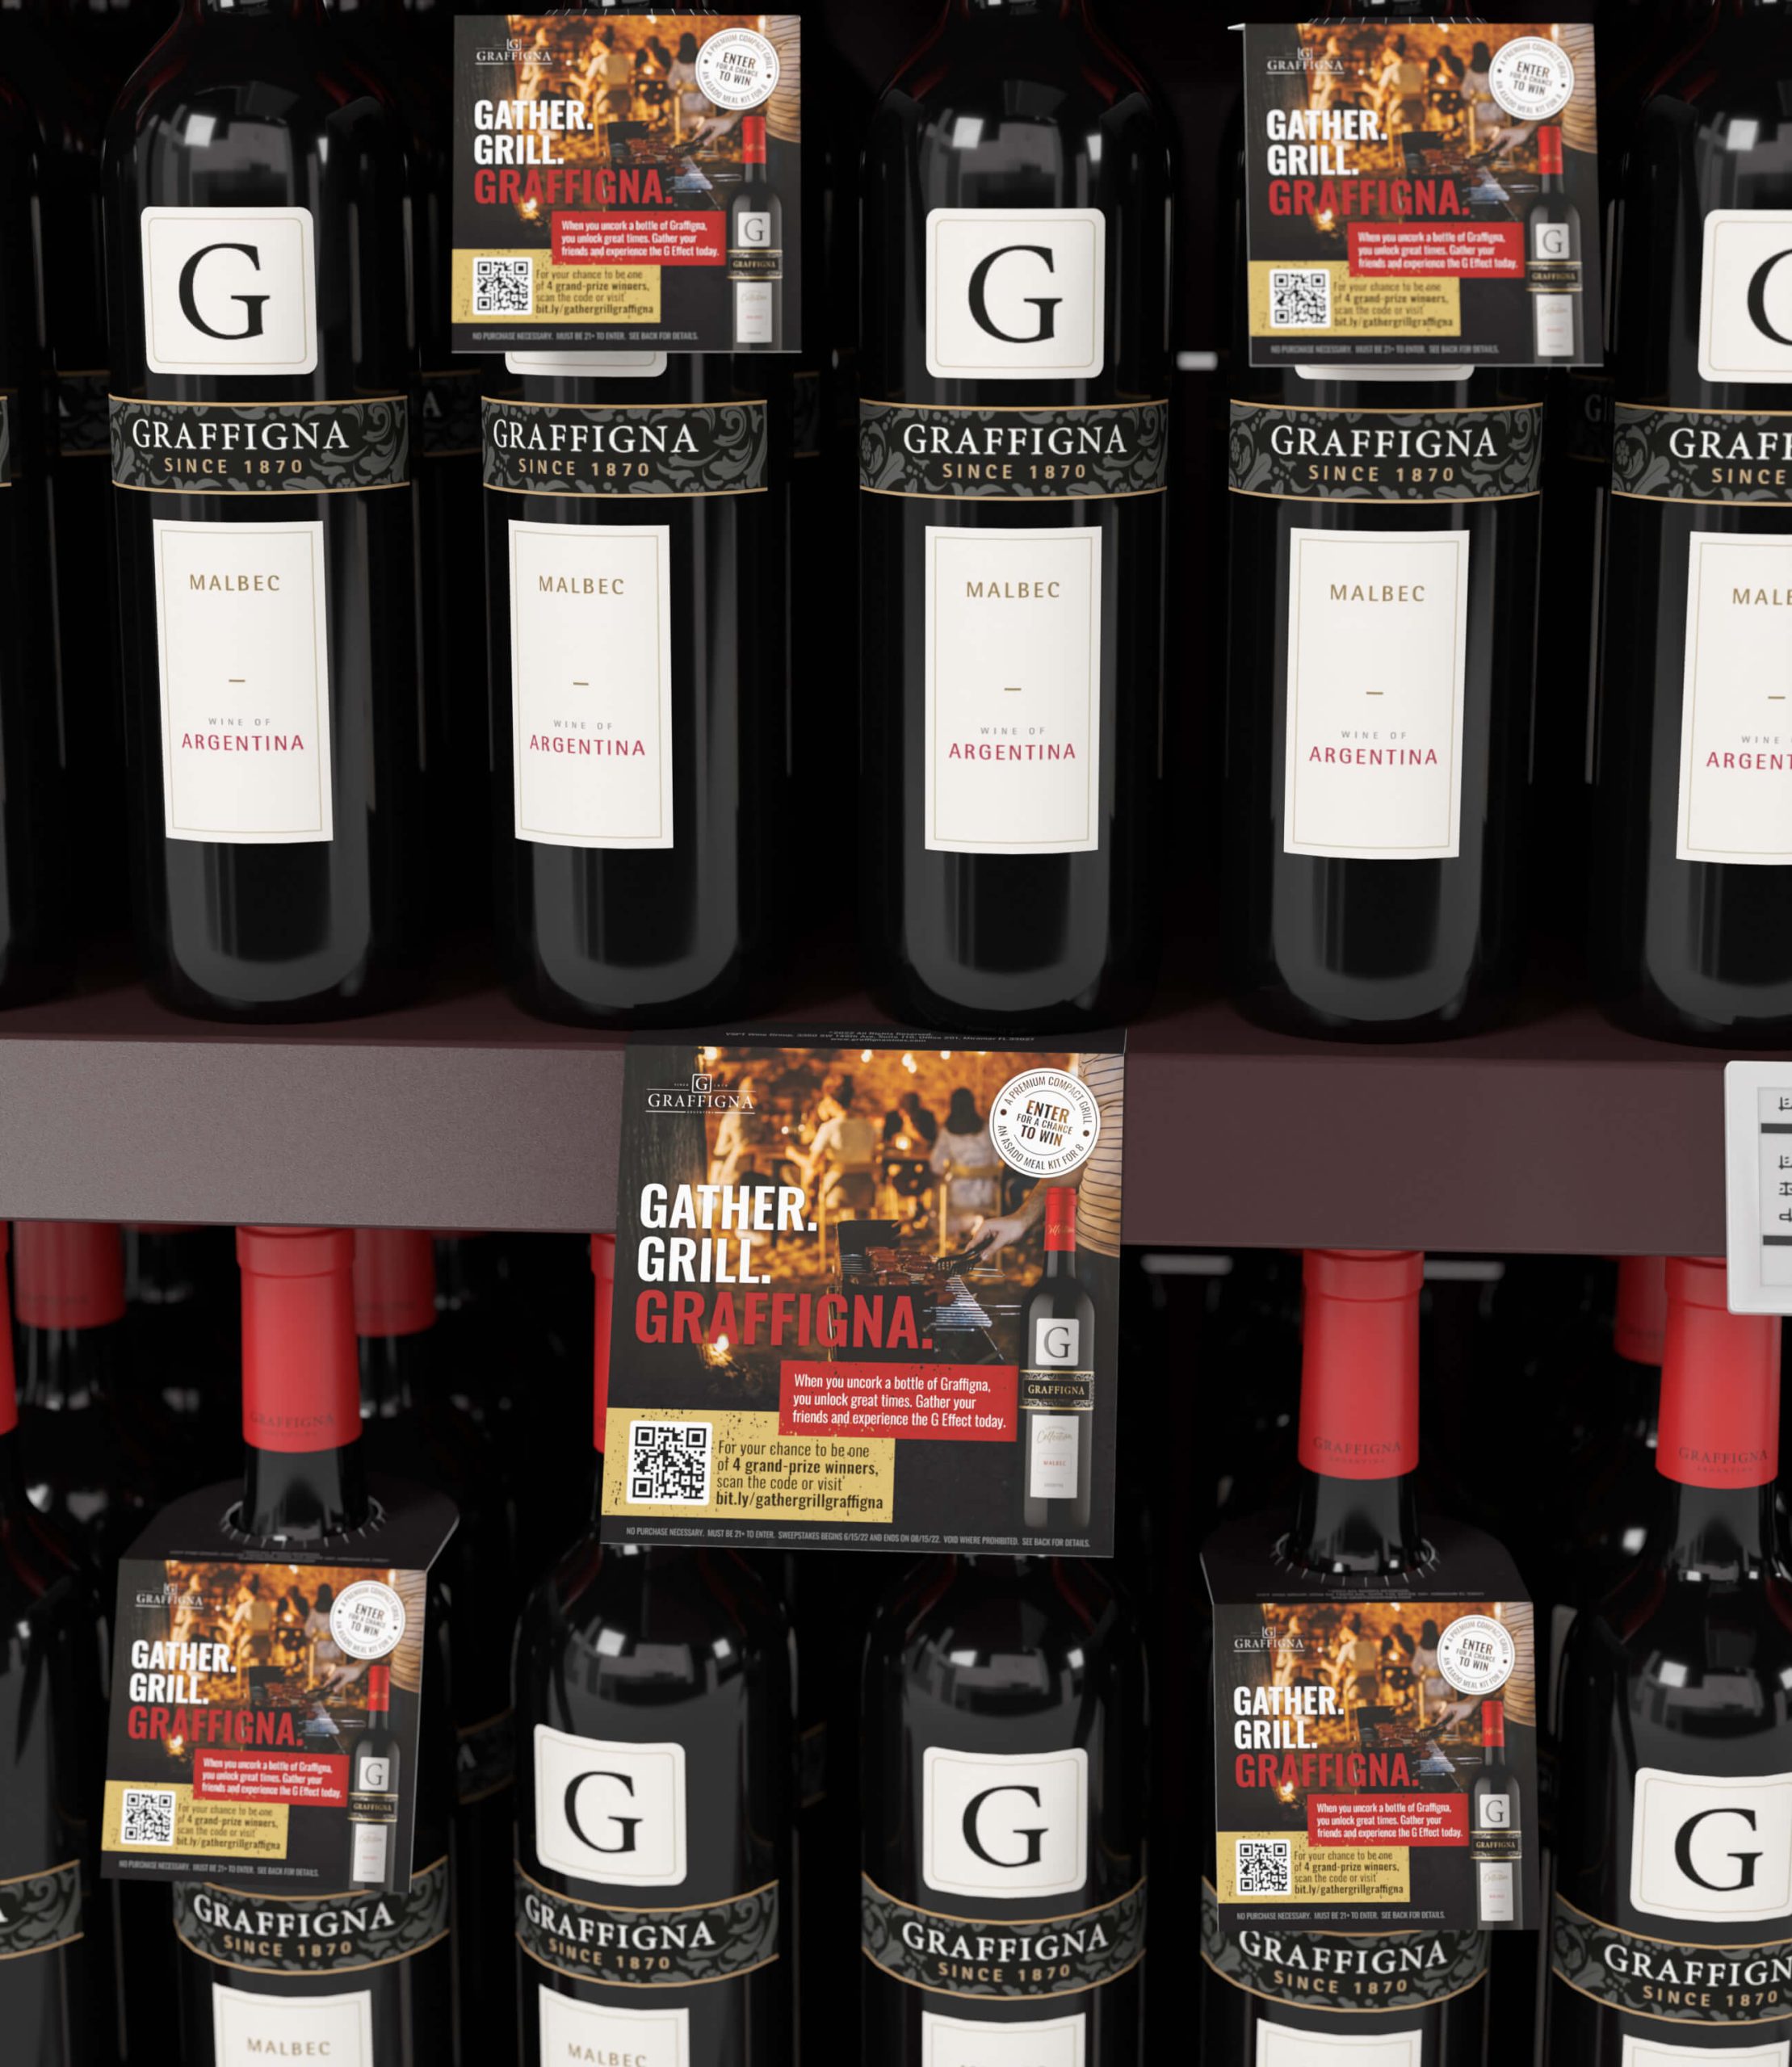 A display of wine bottles on a shelf.